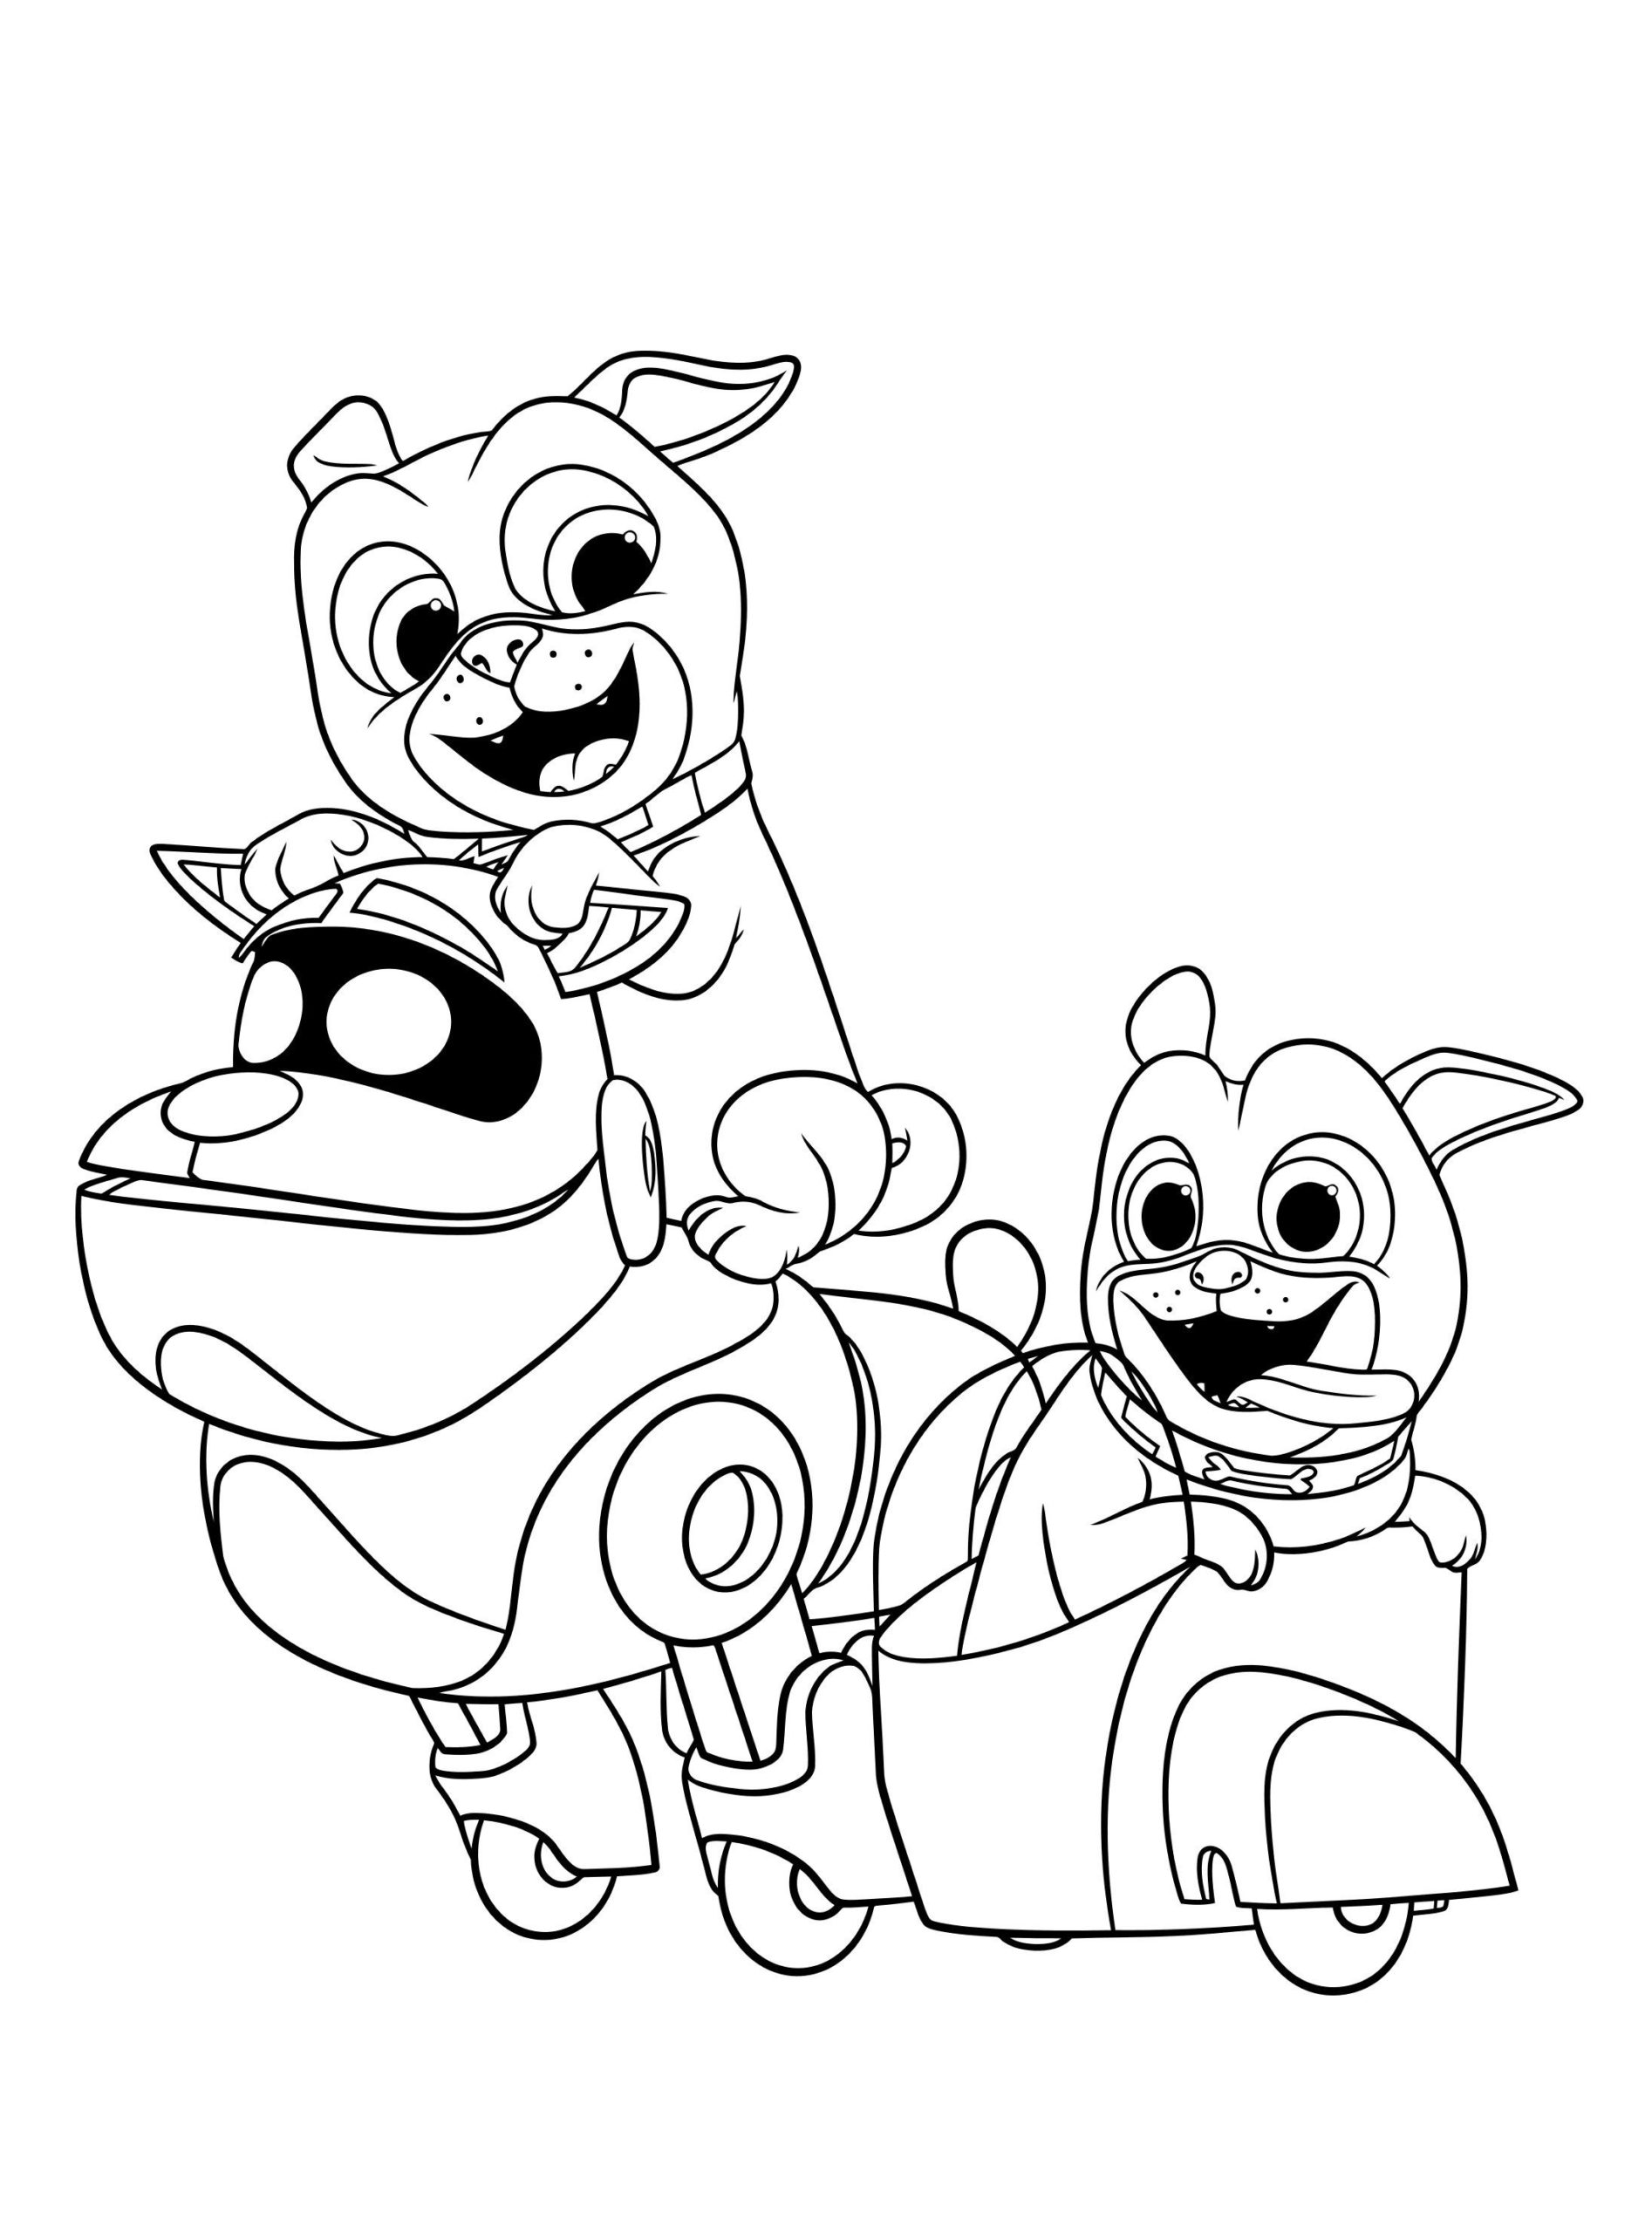 Coloring Pages : Puppy Dog Coloring From The Thousands Of Images ...